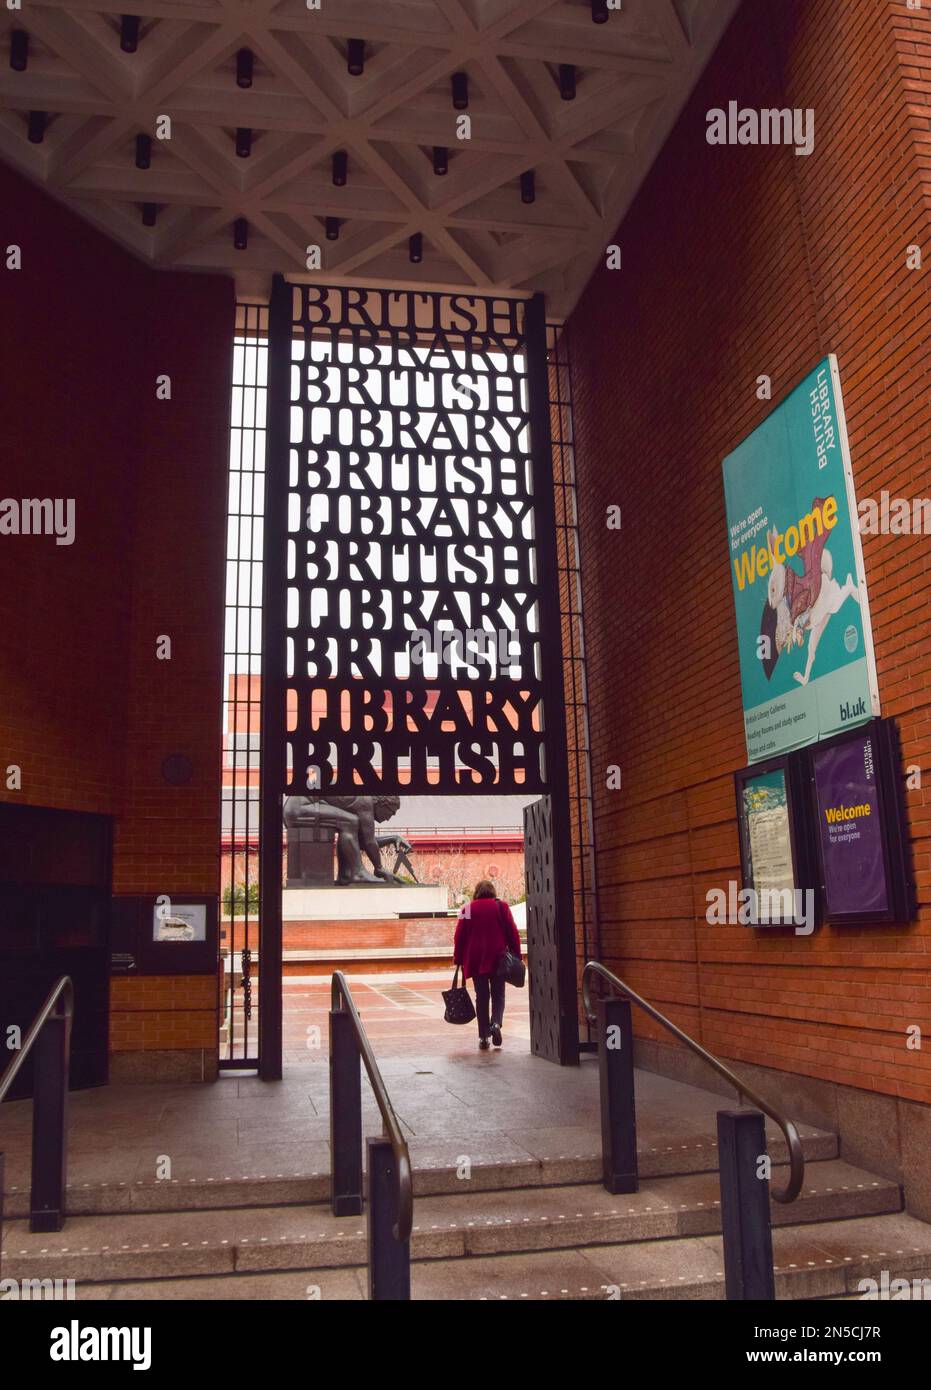 London, UK. 9th February 2023. Exterior view of the British Library. A major new £500 million extension project has been approved, including galleries and event spaces, at the St Pancras site. Credit: Vuk Valcic/Alamy Live News Stock Photo